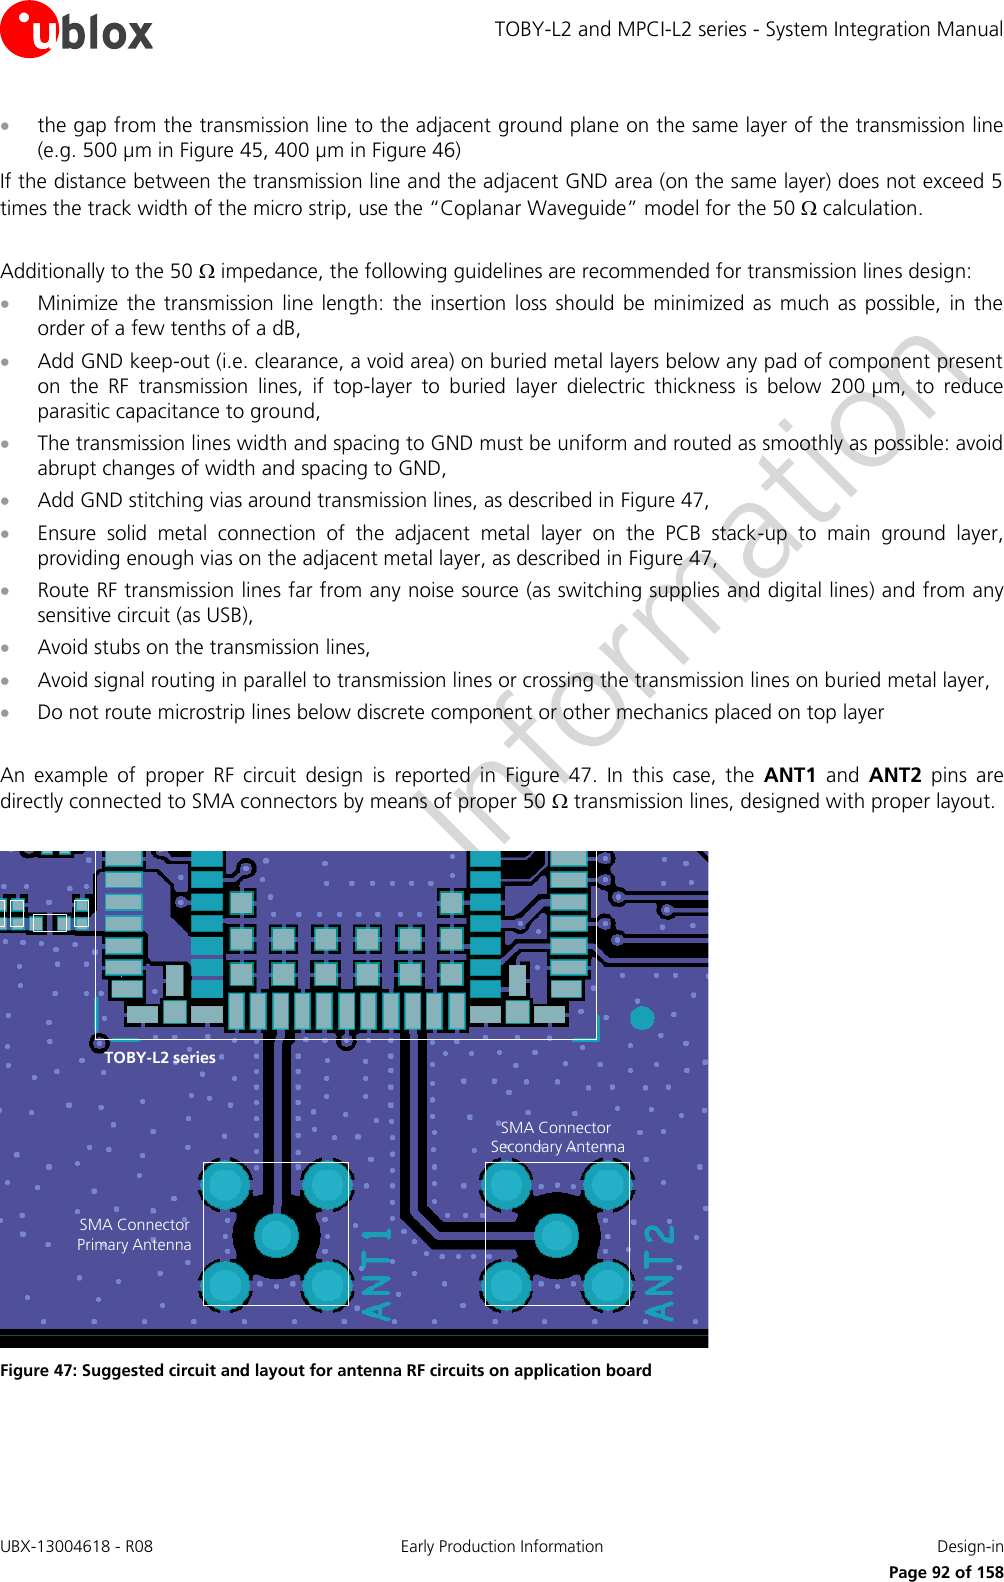 TOBY-L2 and MPCI-L2 series - System Integration Manual UBX-13004618 - R08  Early Production Information  Design-in     Page 92 of 158  the gap from the transmission line to the adjacent ground plane on the same layer of the transmission line (e.g. 500 µm in Figure 45, 400 µm in Figure 46) If the distance between the transmission line and the adjacent GND area (on the same layer) does not exceed 5 times the track width of the micro strip, use the “Coplanar Waveguide” model for the 50  calculation.  Additionally to the 50  impedance, the following guidelines are recommended for transmission lines design:  Minimize  the  transmission  line length: the  insertion  loss  should  be  minimized  as  much as  possible,  in  the order of a few tenths of a dB,  Add GND keep-out (i.e. clearance, a void area) on buried metal layers below any pad of component present on  the  RF  transmission  lines,  if  top-layer  to  buried  layer  dielectric  thickness  is  below  200 µm,  to  reduce parasitic capacitance to ground,  The transmission lines width and spacing to GND must be uniform and routed as smoothly as possible: avoid abrupt changes of width and spacing to GND,  Add GND stitching vias around transmission lines, as described in Figure 47,  Ensure  solid  metal  connection  of  the  adjacent  metal  layer  on  the  PCB  stack-up  to  main  ground  layer, providing enough vias on the adjacent metal layer, as described in Figure 47,  Route RF transmission lines far from any noise source (as switching supplies and digital lines) and from any sensitive circuit (as USB),  Avoid stubs on the transmission lines,  Avoid signal routing in parallel to transmission lines or crossing the transmission lines on buried metal layer,  Do not route microstrip lines below discrete component or other mechanics placed on top layer  An  example  of  proper  RF  circuit  design  is  reported  in  Figure  47.  In  this  case,  the  ANT1  and  ANT2  pins  are directly connected to SMA connectors by means of proper 50  transmission lines, designed with proper layout.  SMA Connector Primary AntennaSMA Connector Secondary AntennaTOBY-L2 series Figure 47: Suggested circuit and layout for antenna RF circuits on application board  